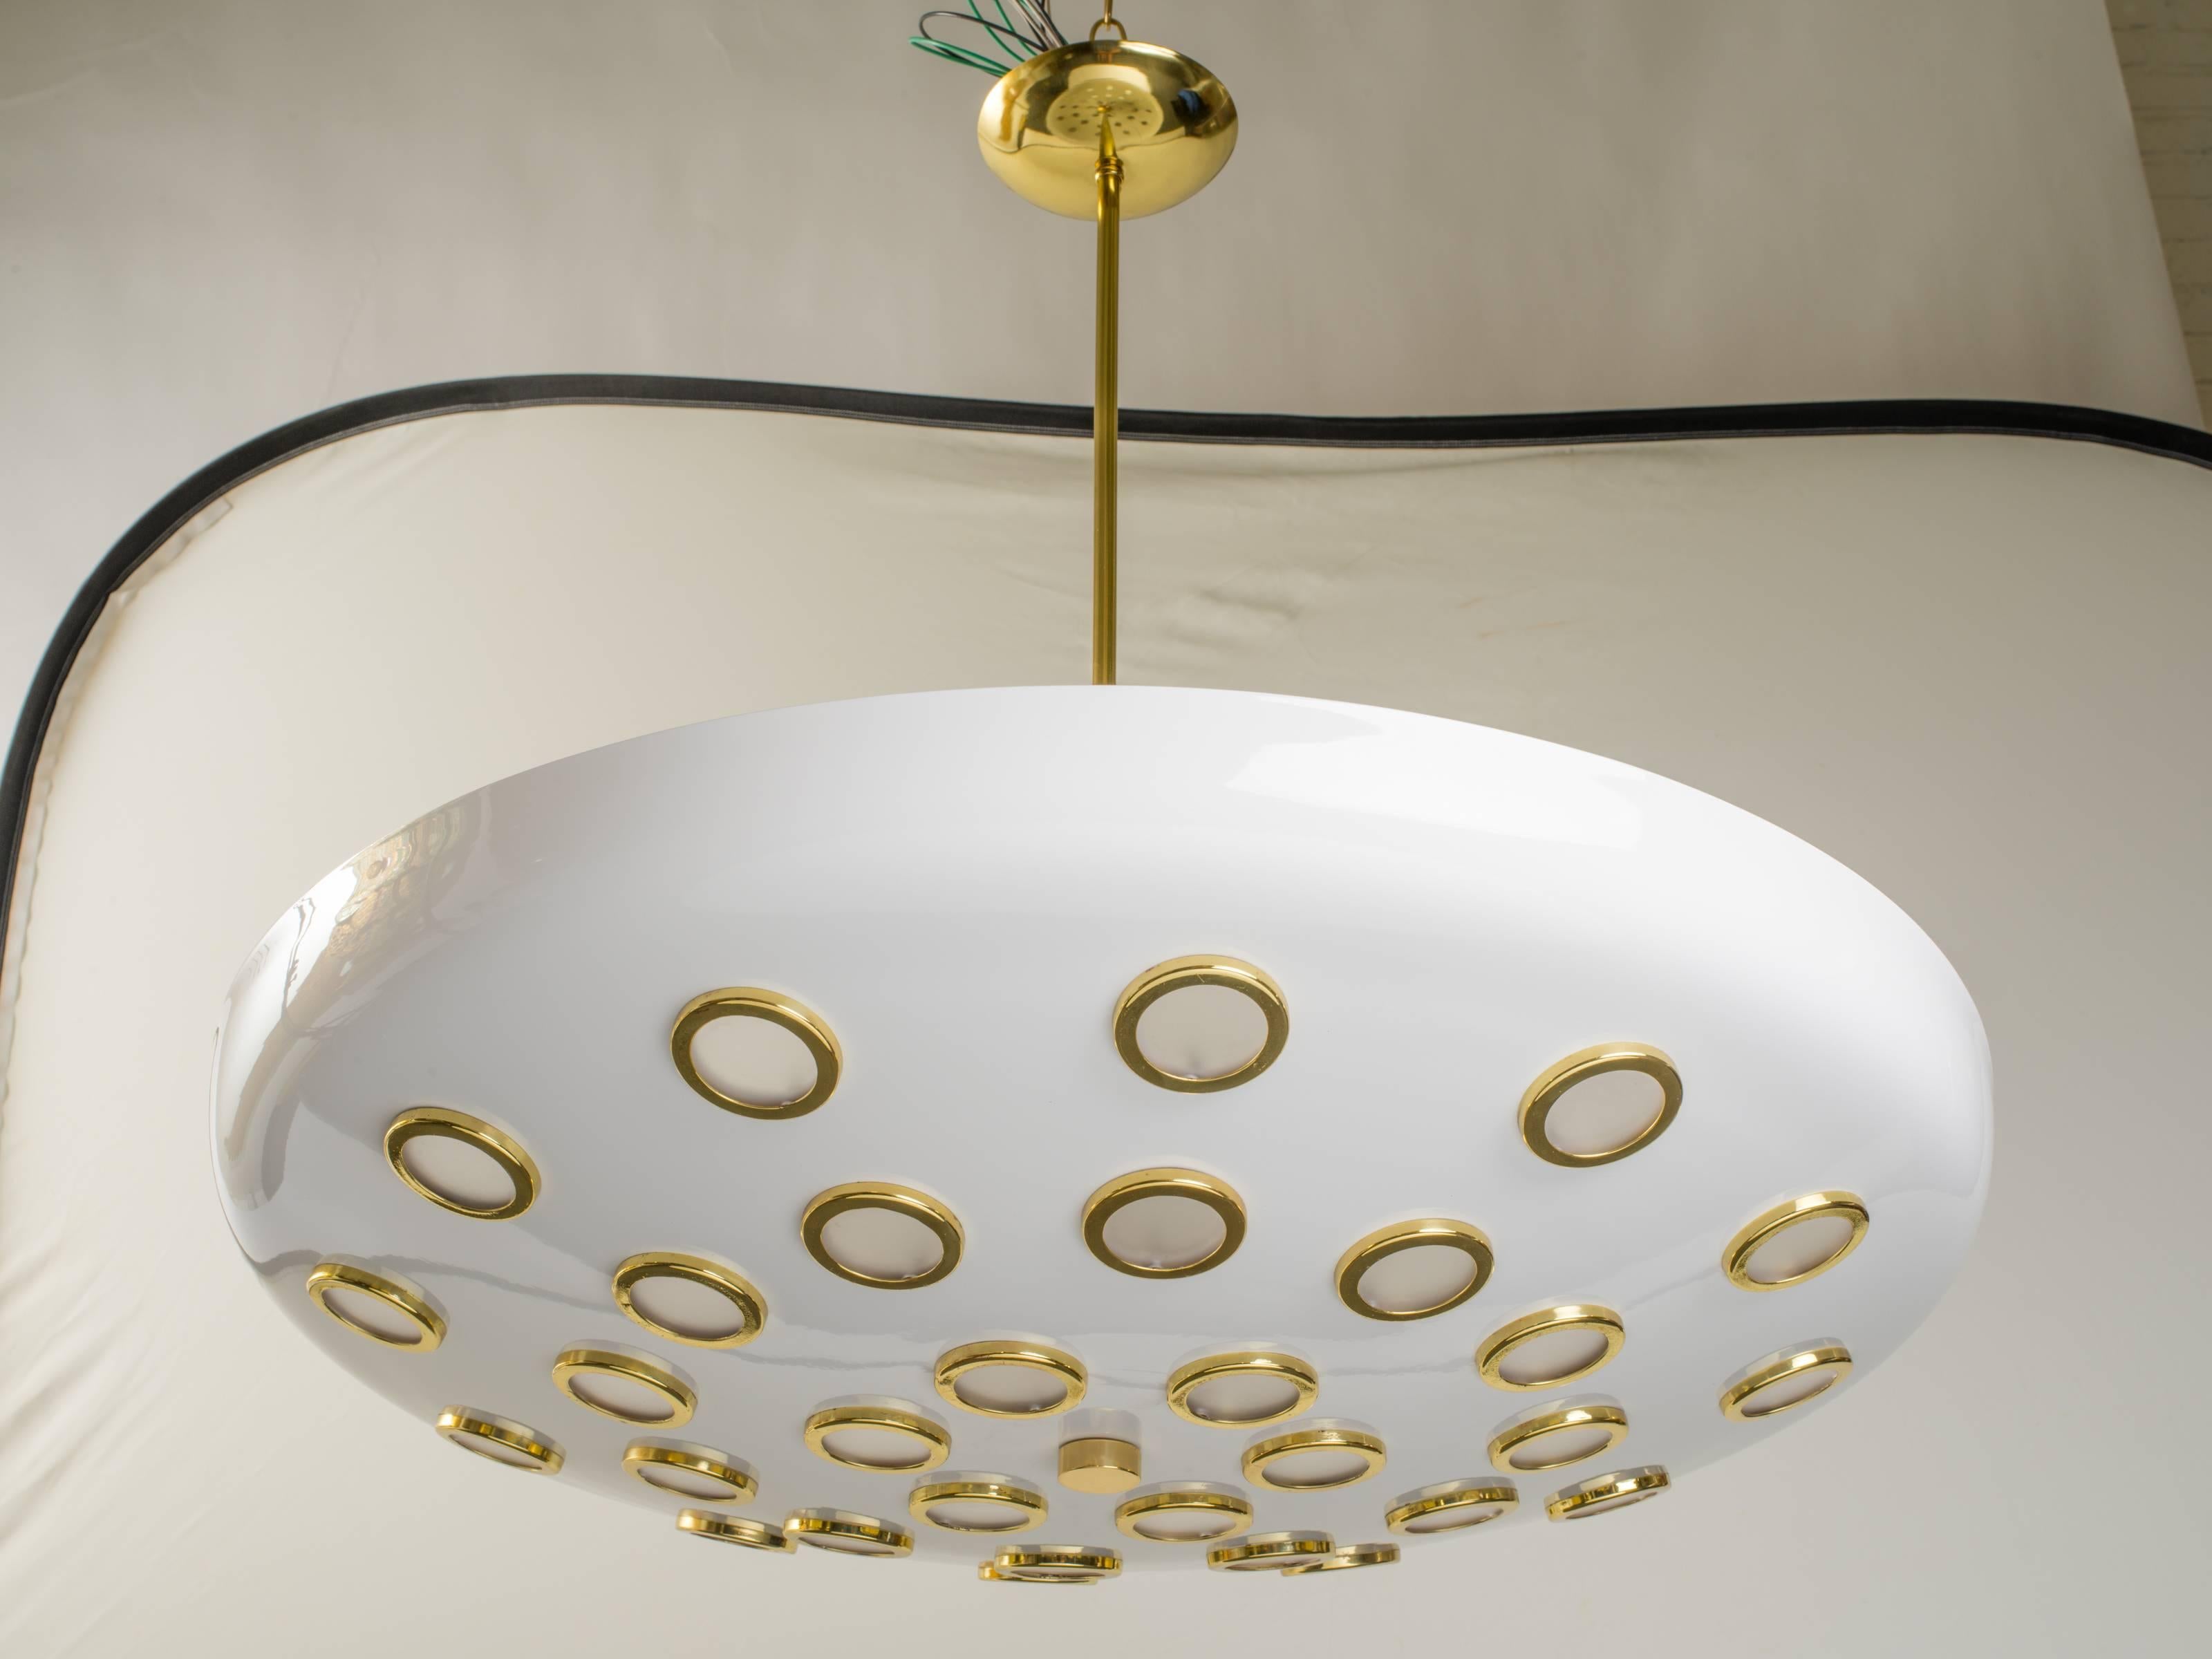 Large flying saucer fixture composed of 30 small frosted lenses and brass rings.
Arredoluce produced these style chandelier in the 1960s.
Dimension: 32